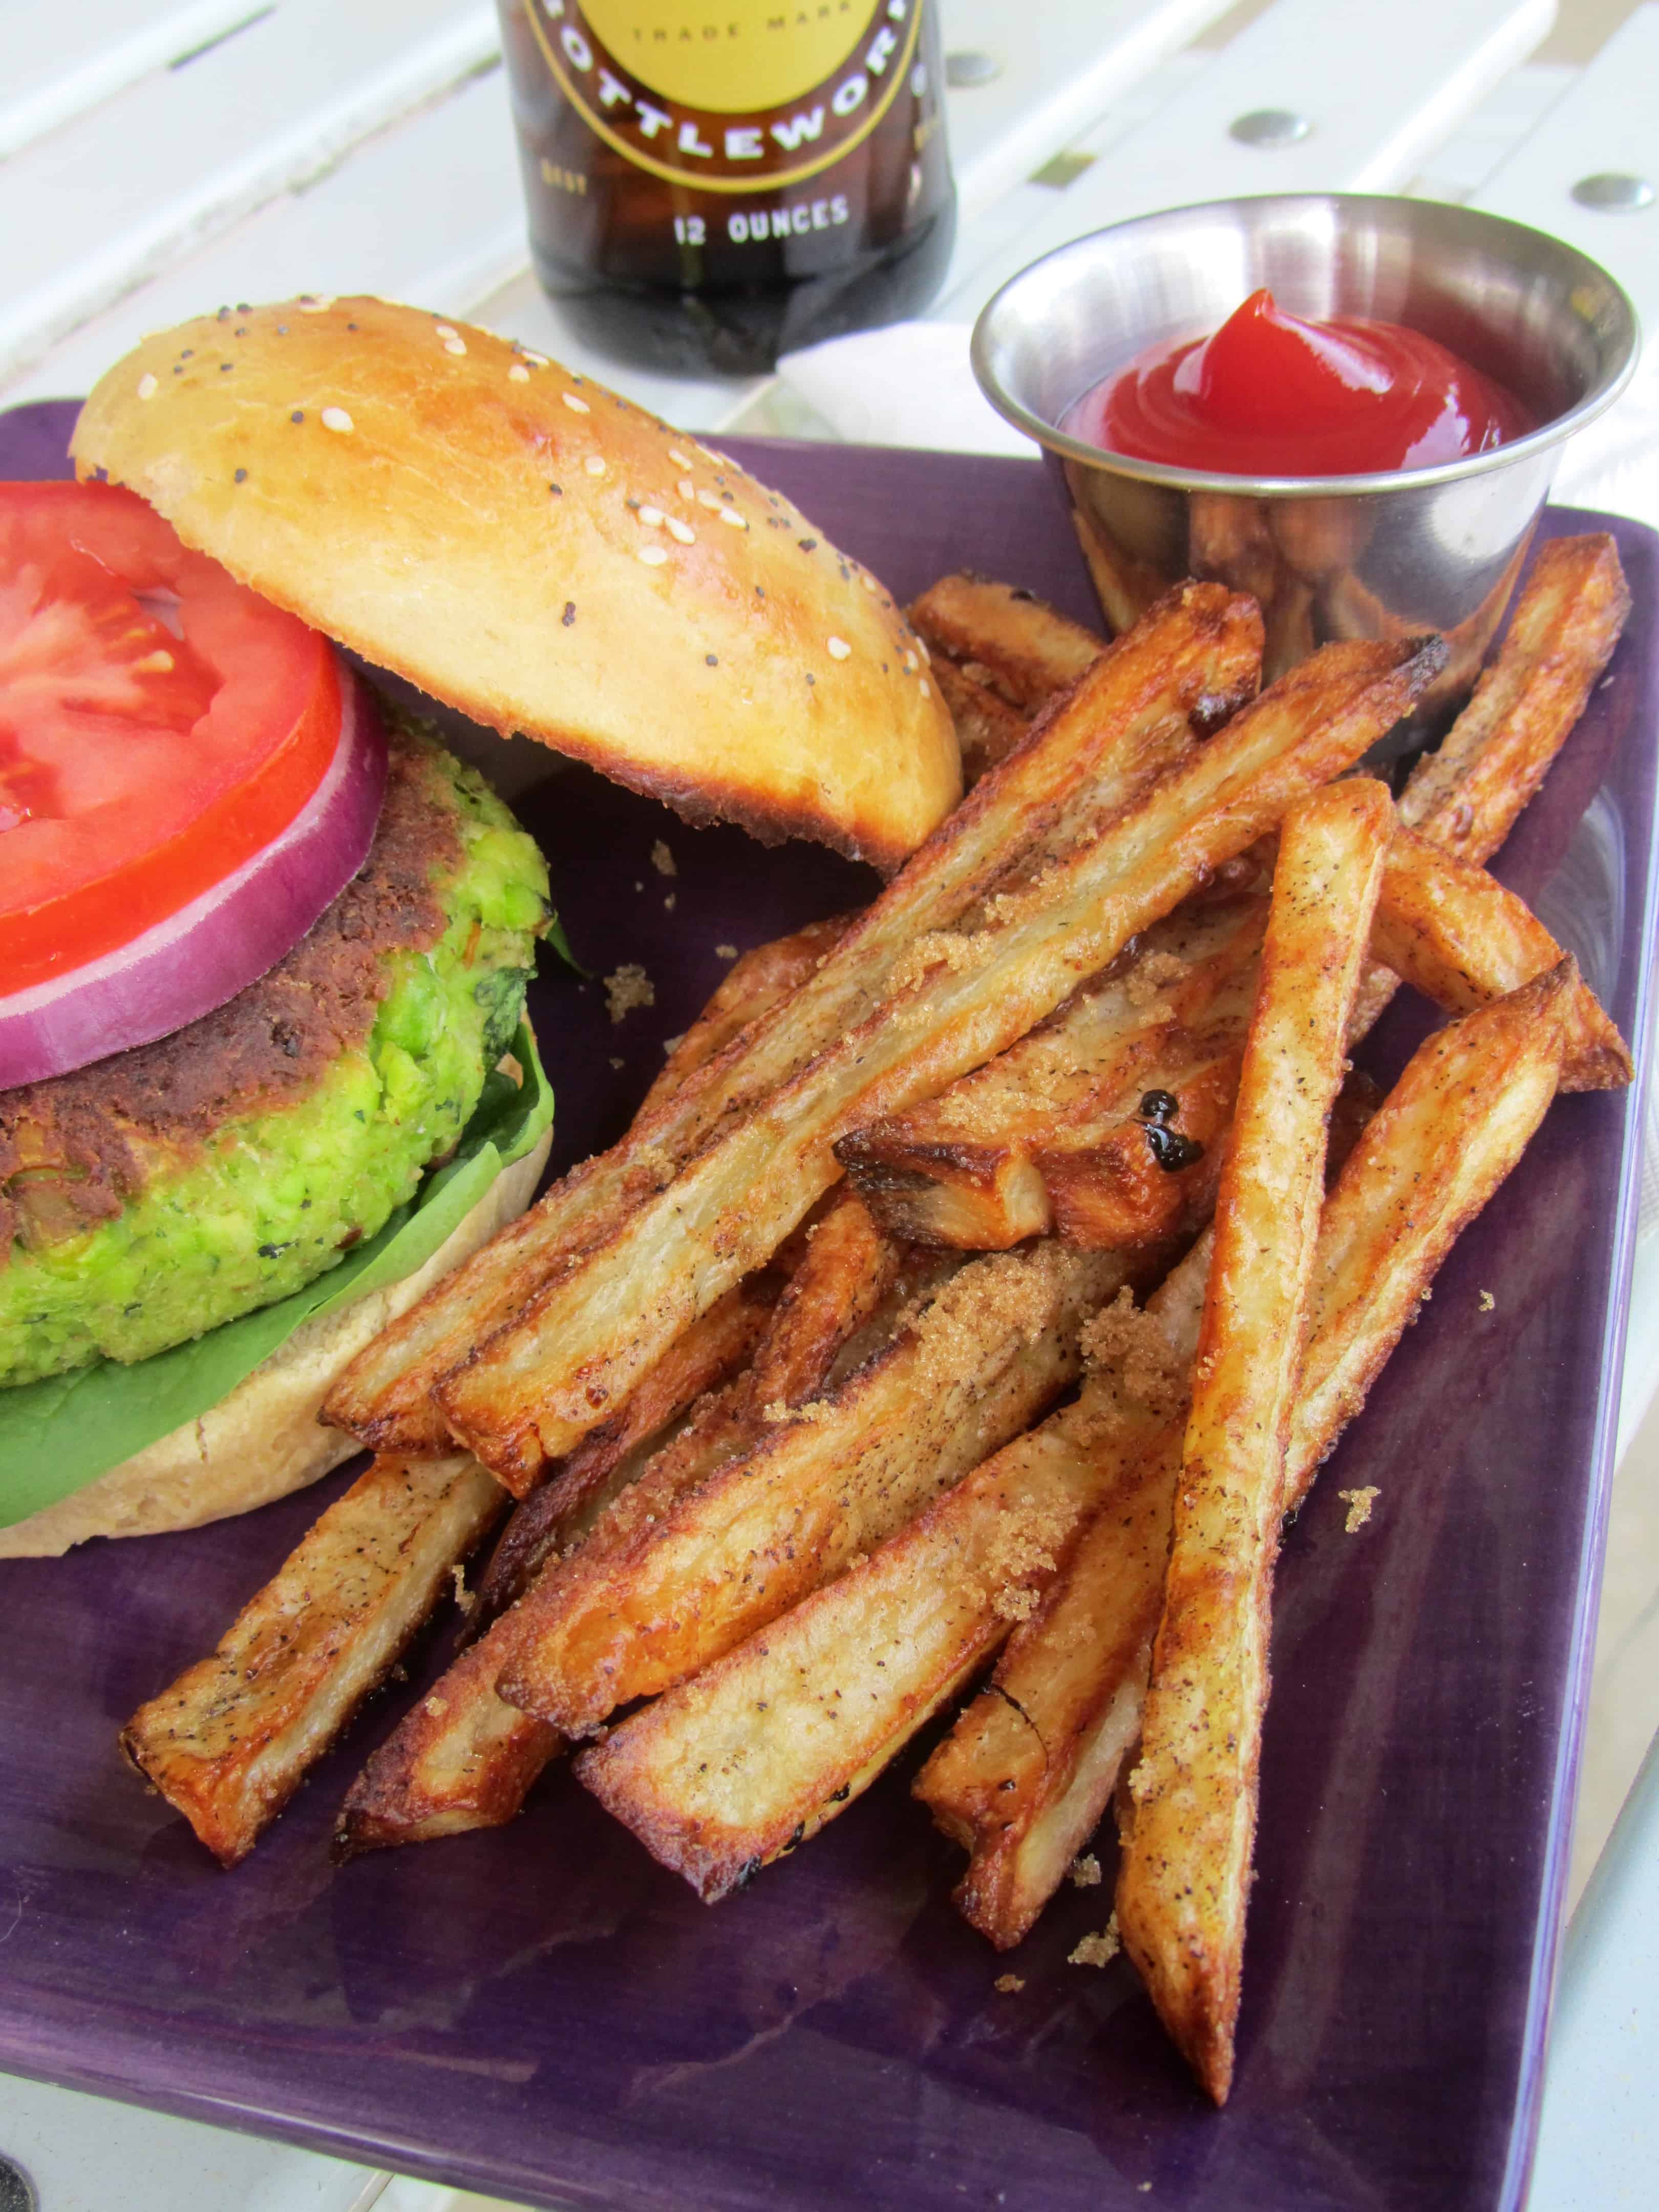 https://www.thespiffycookie.com/wp-content/uploads/2013/04/Brown-Sugar-Baked-Fries.jpg